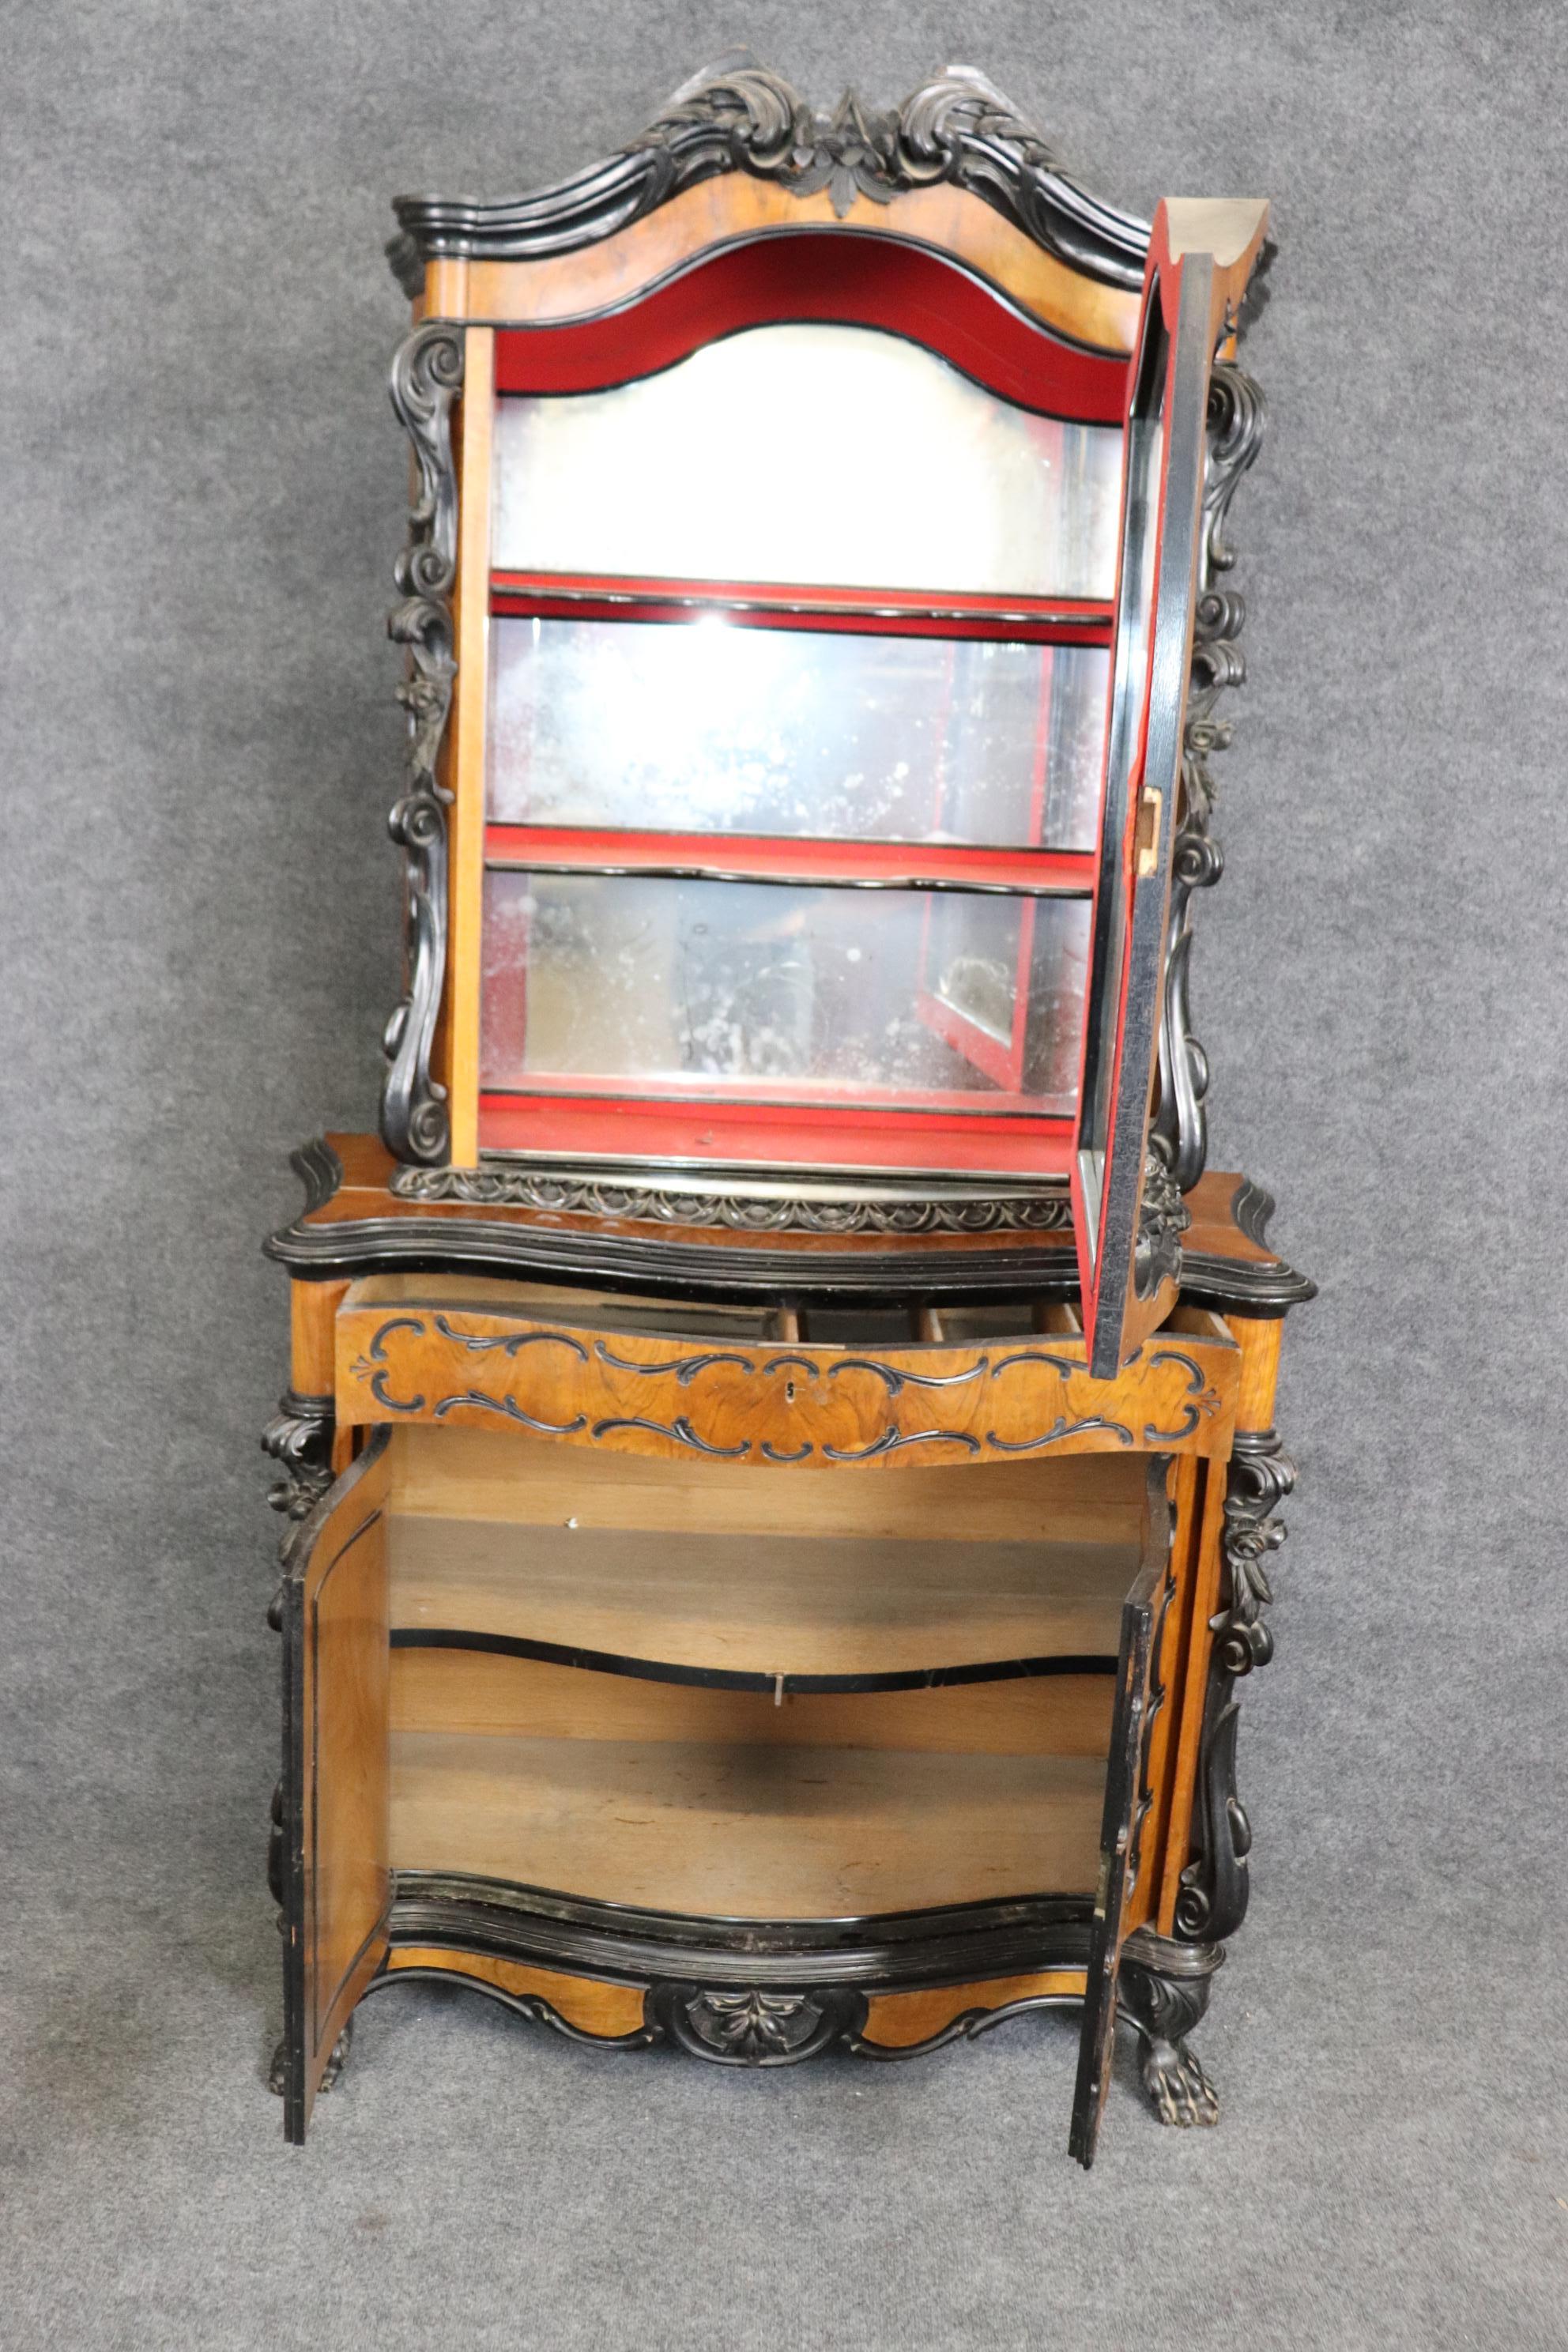 This is a gorgeous cabinet with red velvet interior for the shelving. The cabinet features extraoridinary wood quality with ebonized accents and no major damages, wear or issues beyond time-worn issues. Measures 85 tall x 46.25 x 19 inches deep.